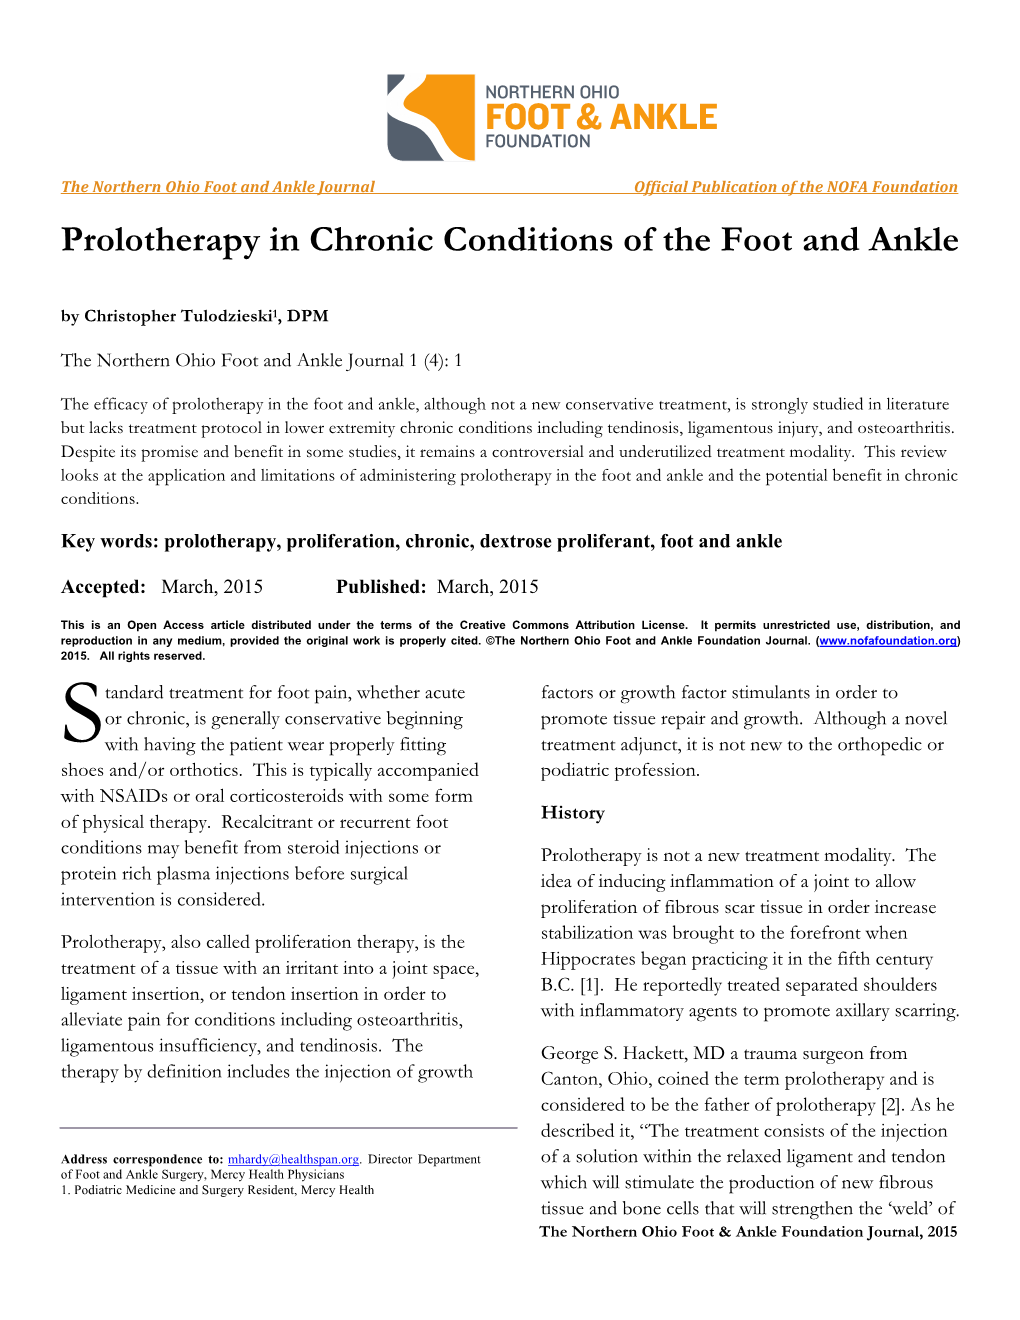 Prolotherapy in Chronic Conditions of the Foot and Ankle